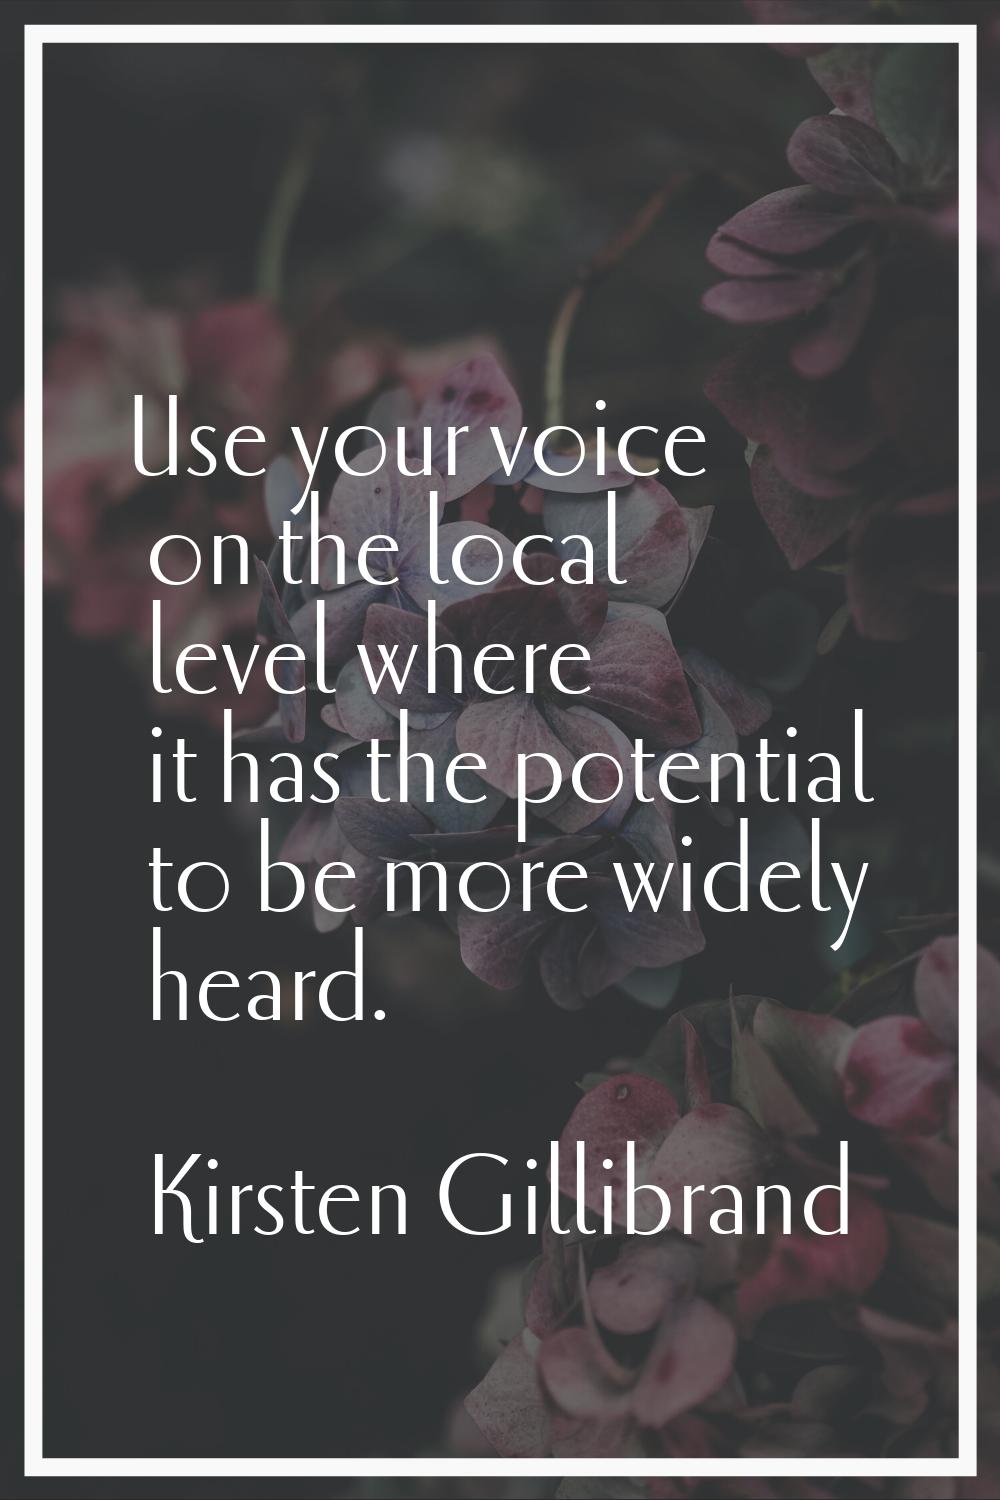 Use your voice on the local level where it has the potential to be more widely heard.